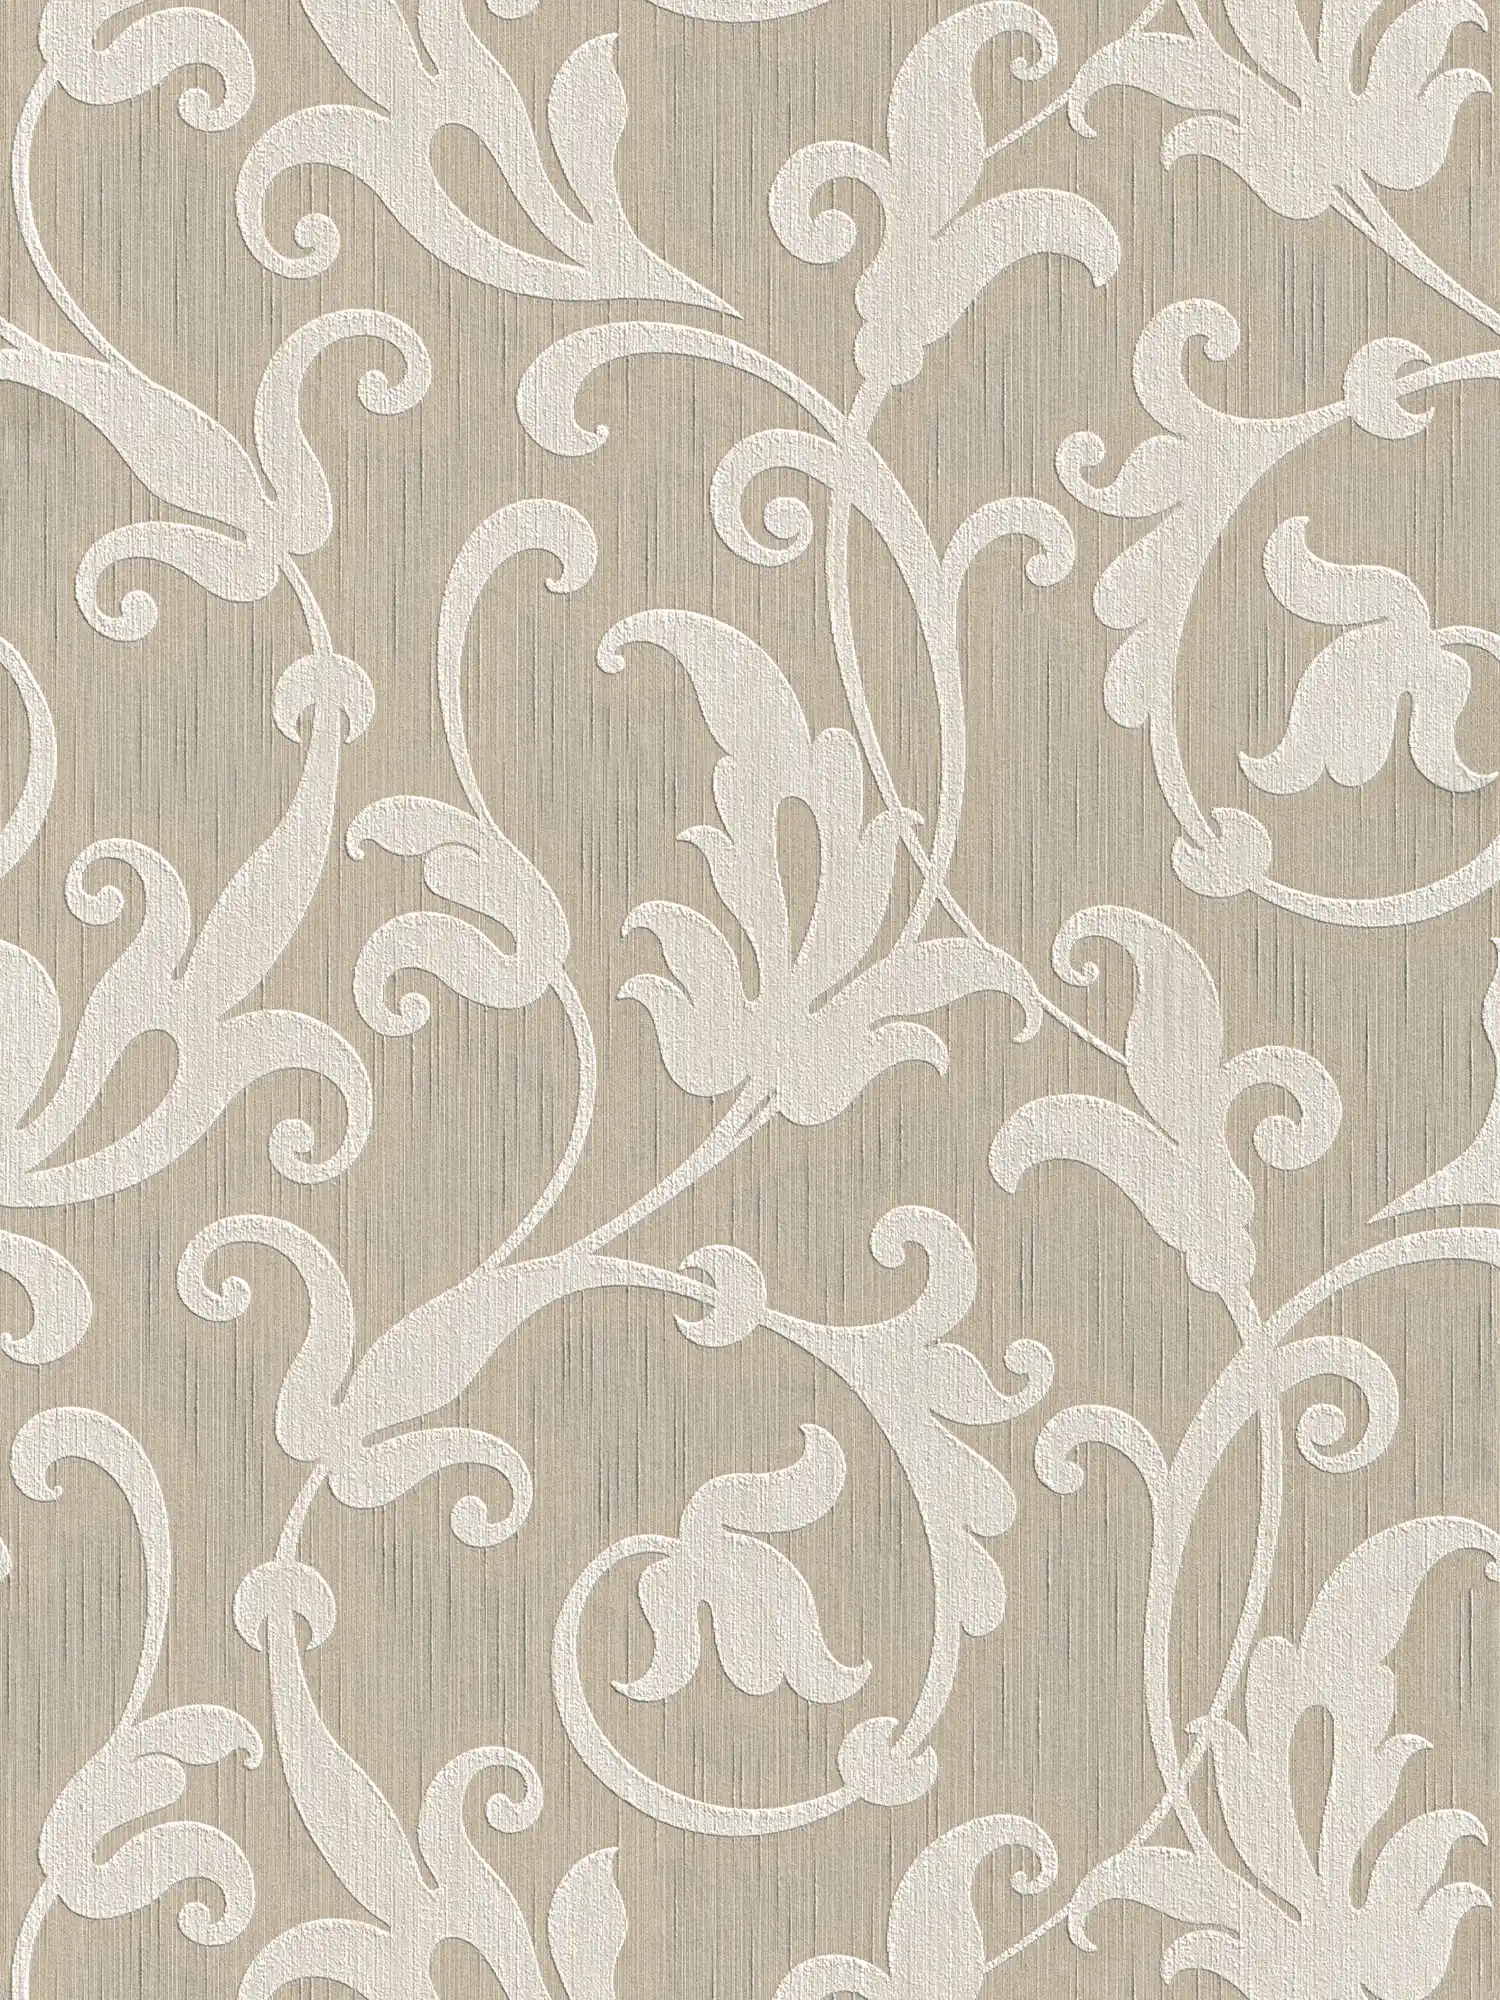 Textile wallpaper embossed with ornaments - beige, silver
